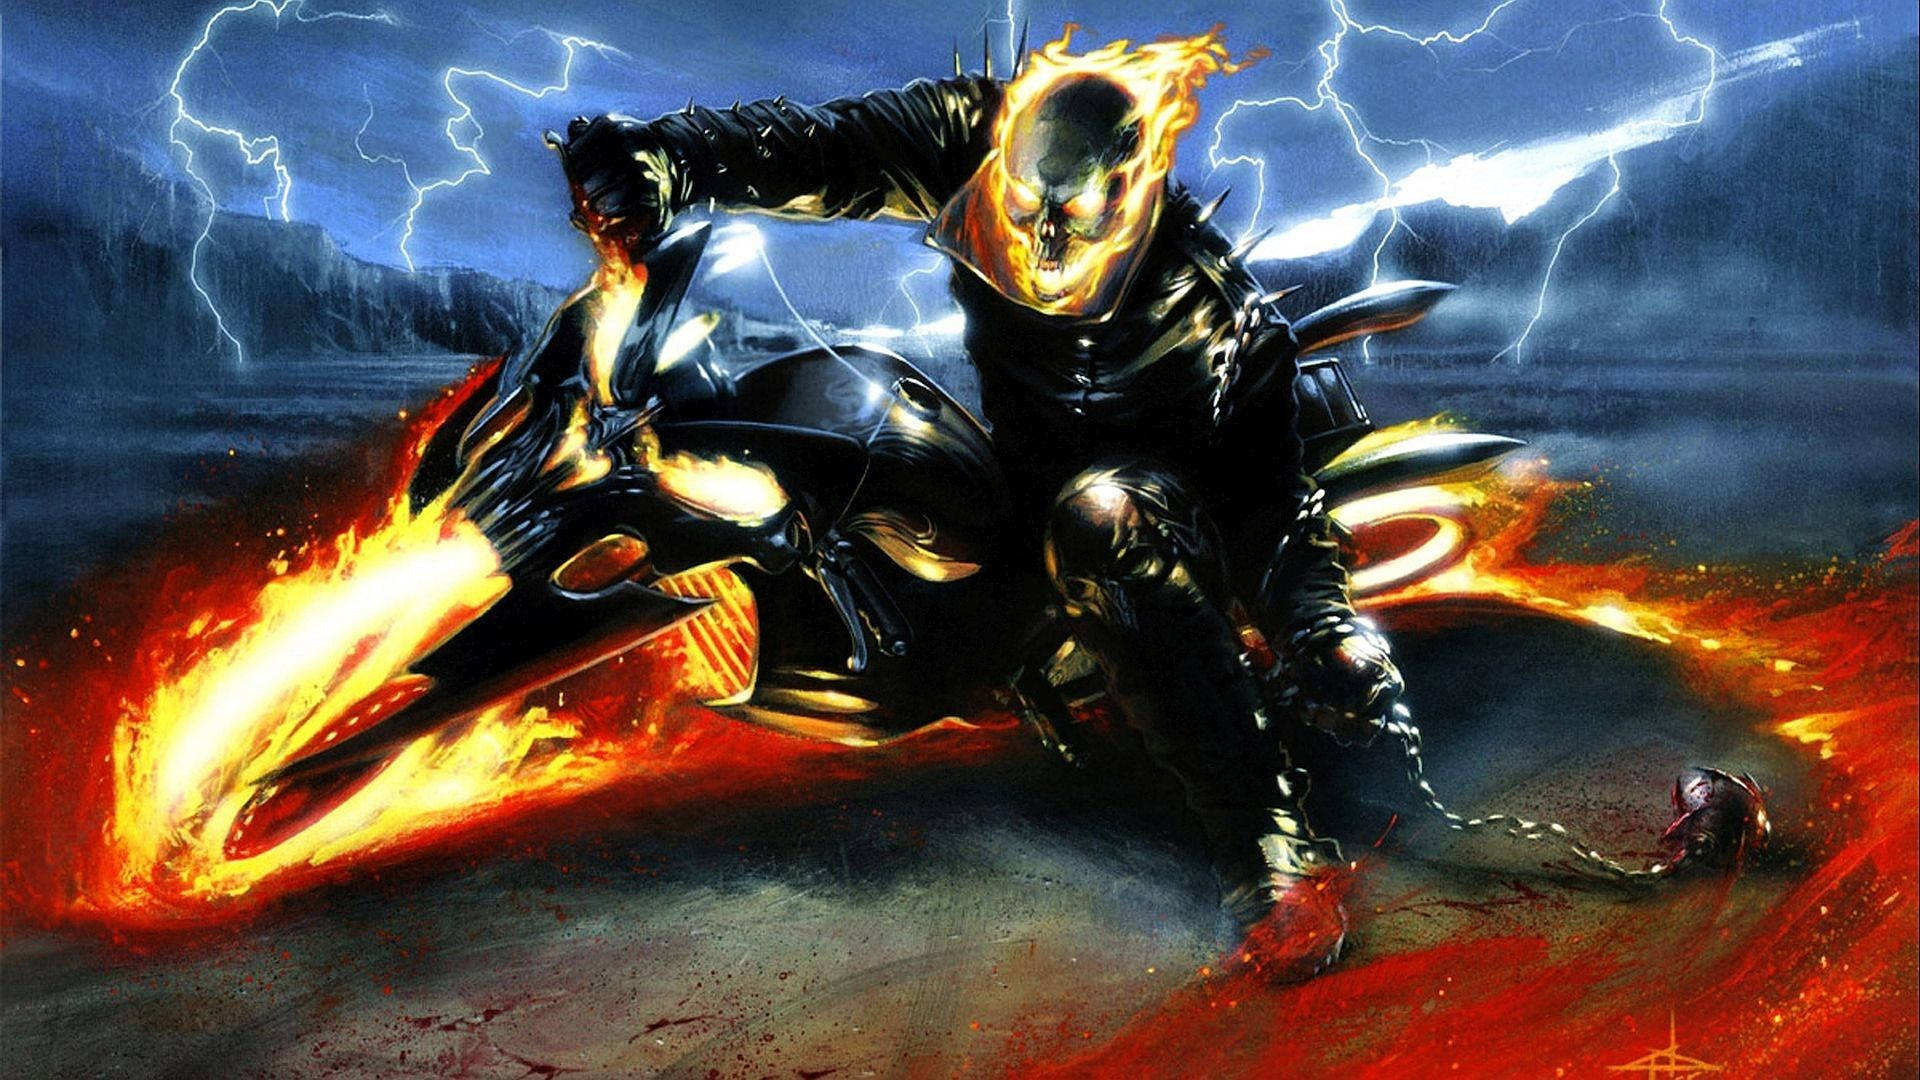 Blue Ghost Rider Lightning And Flame Background